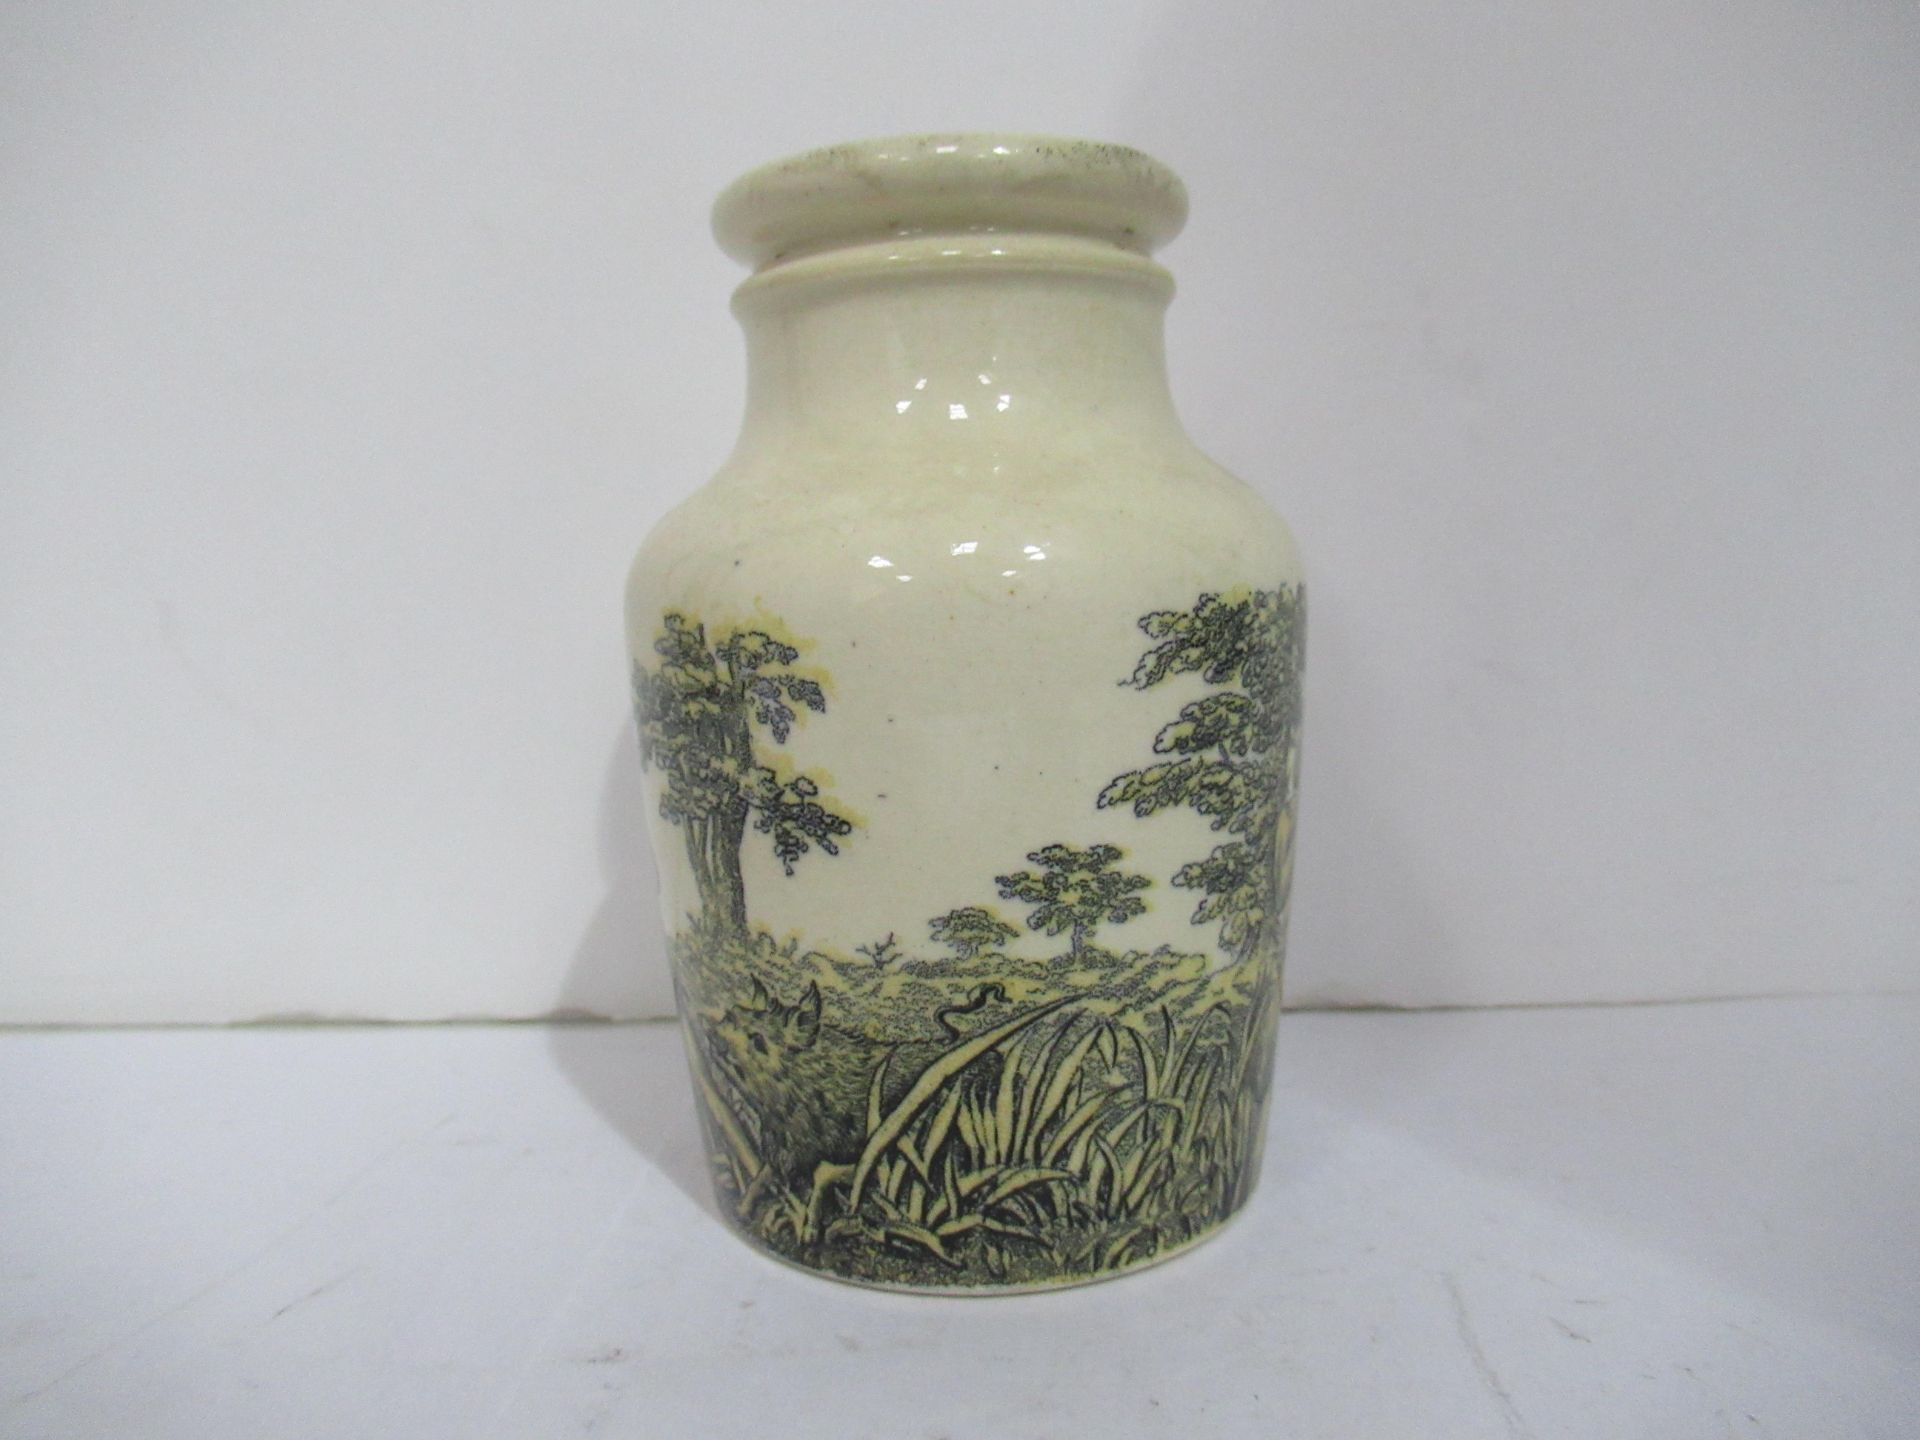 6x Prattware painted jars including one depicting Venice - Image 16 of 42